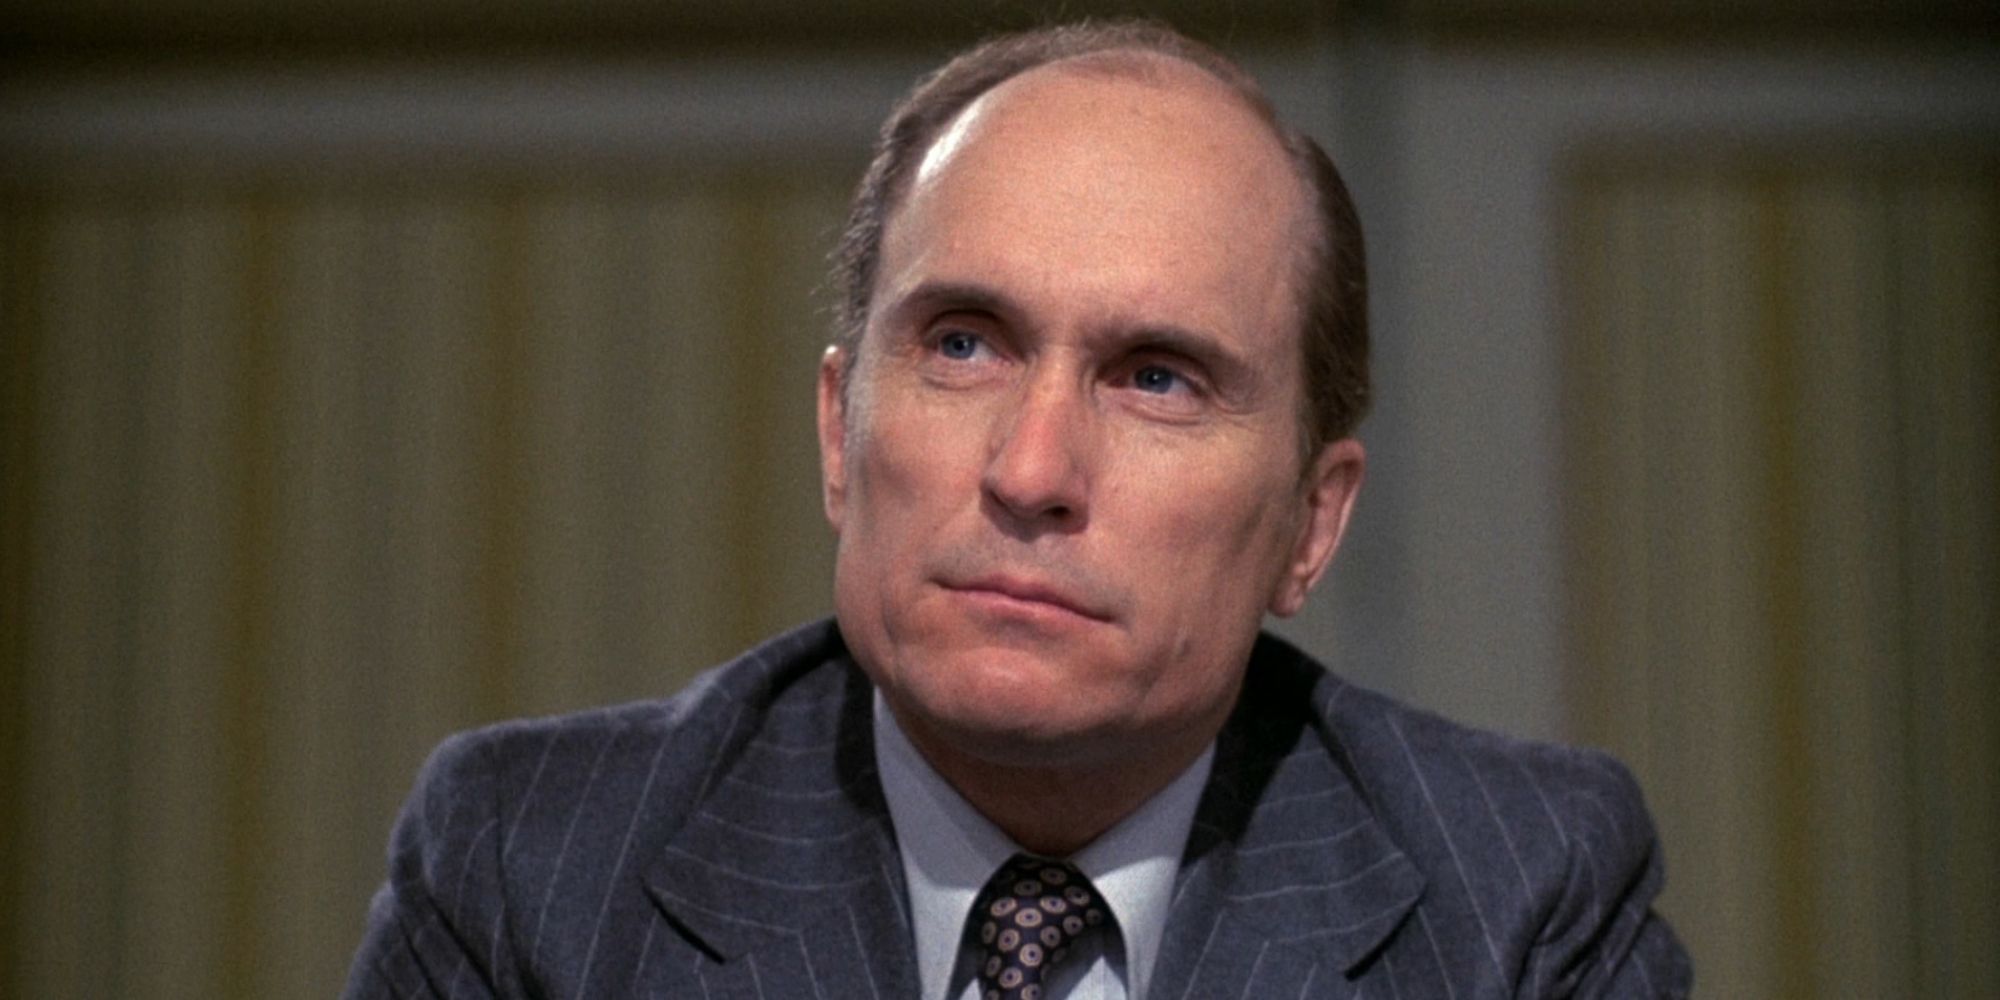 Robert Duvall as Frank Hackett, wearing a suit and looking seriously at something offscreen in Network